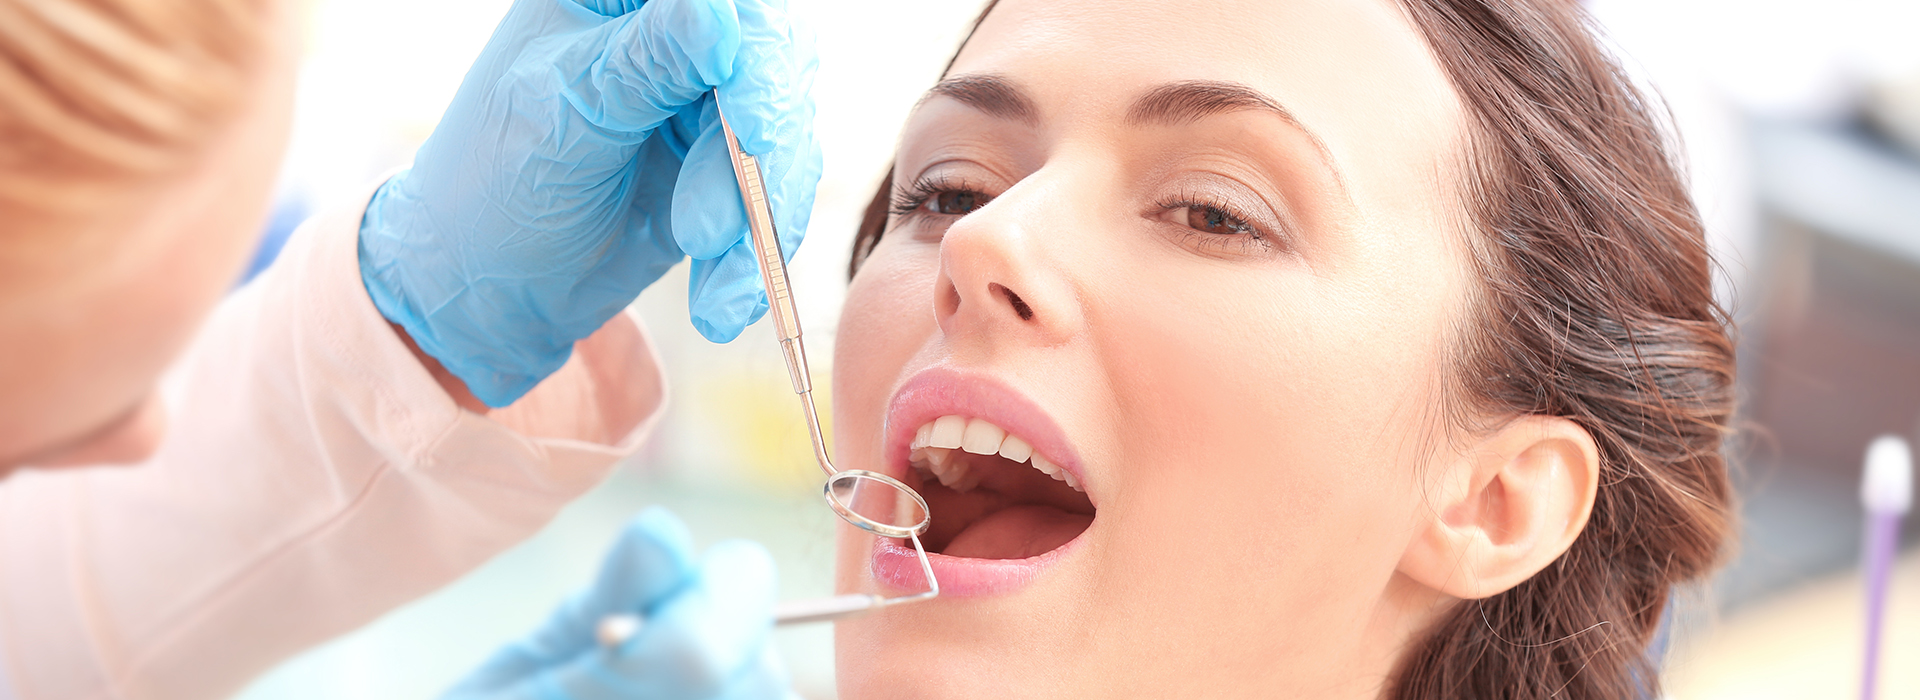 Springfield Gentle Dental | Root Canals, Oral Exams and Emergency Treatment